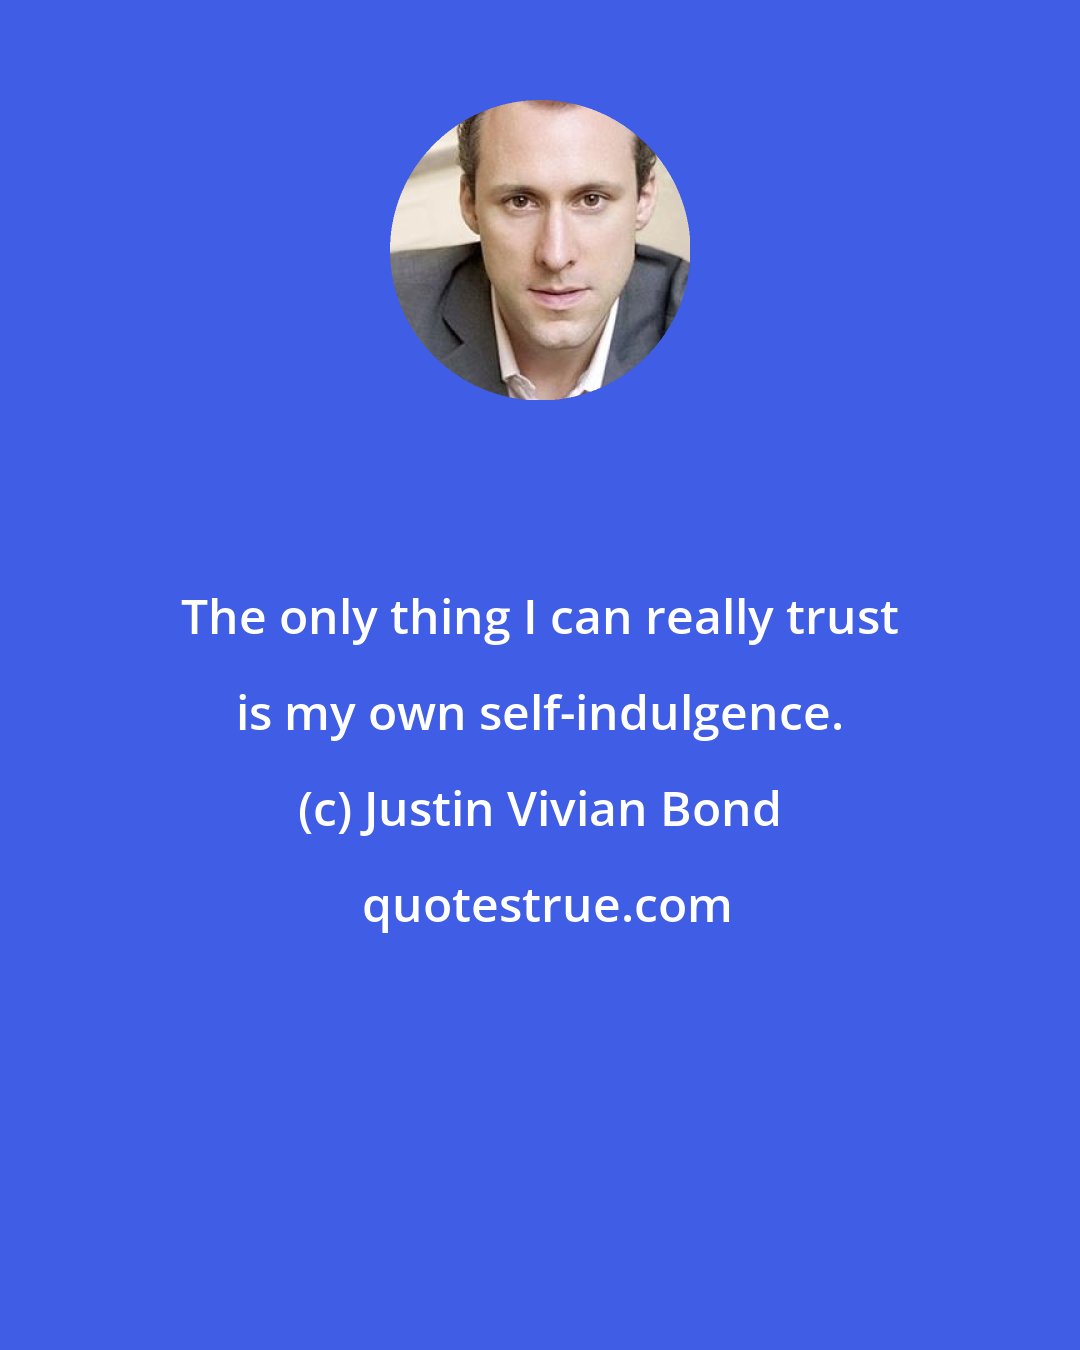 Justin Vivian Bond: The only thing I can really trust is my own self-indulgence.